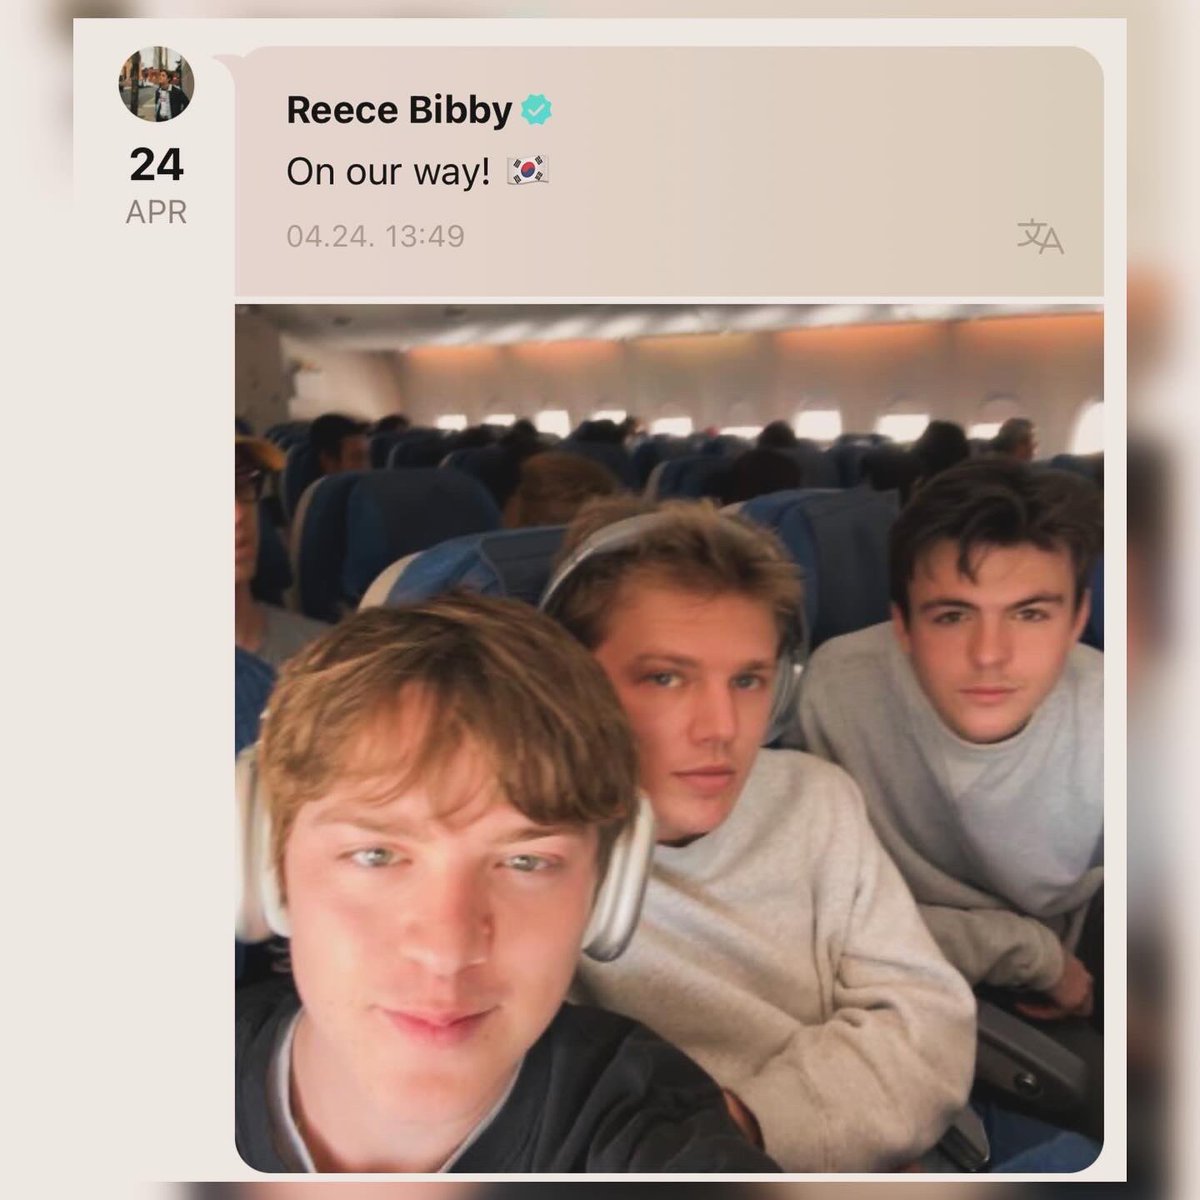 @NewHopeClub on the way to Korea!!! Nice hair cut @NewHopeGeorge ❤️❤️❤️ Safe travels boys!